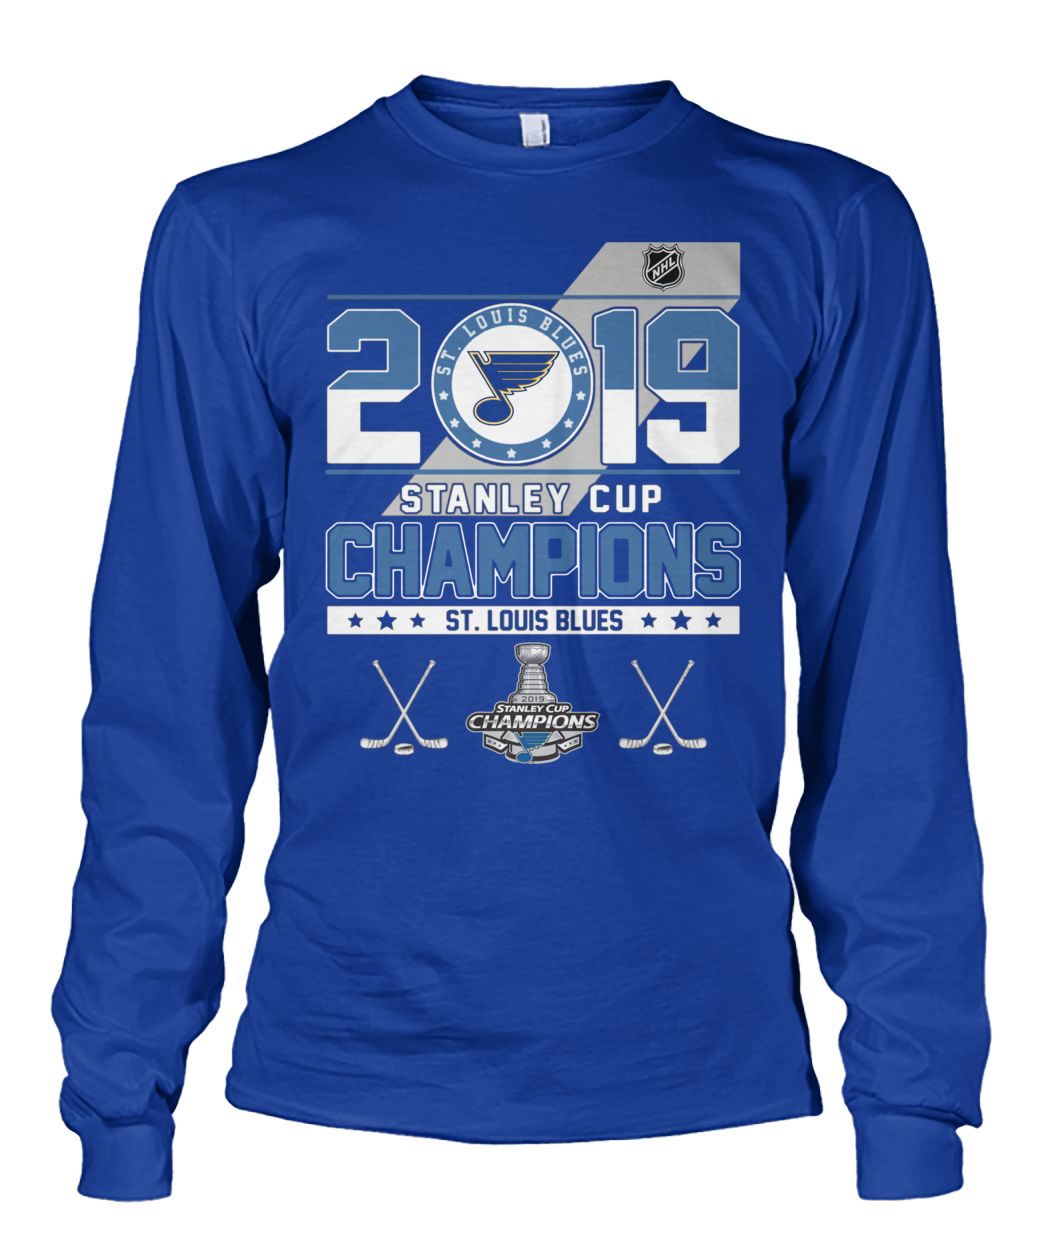 2019 st louis blues stanley cup champions unisex long sleeve